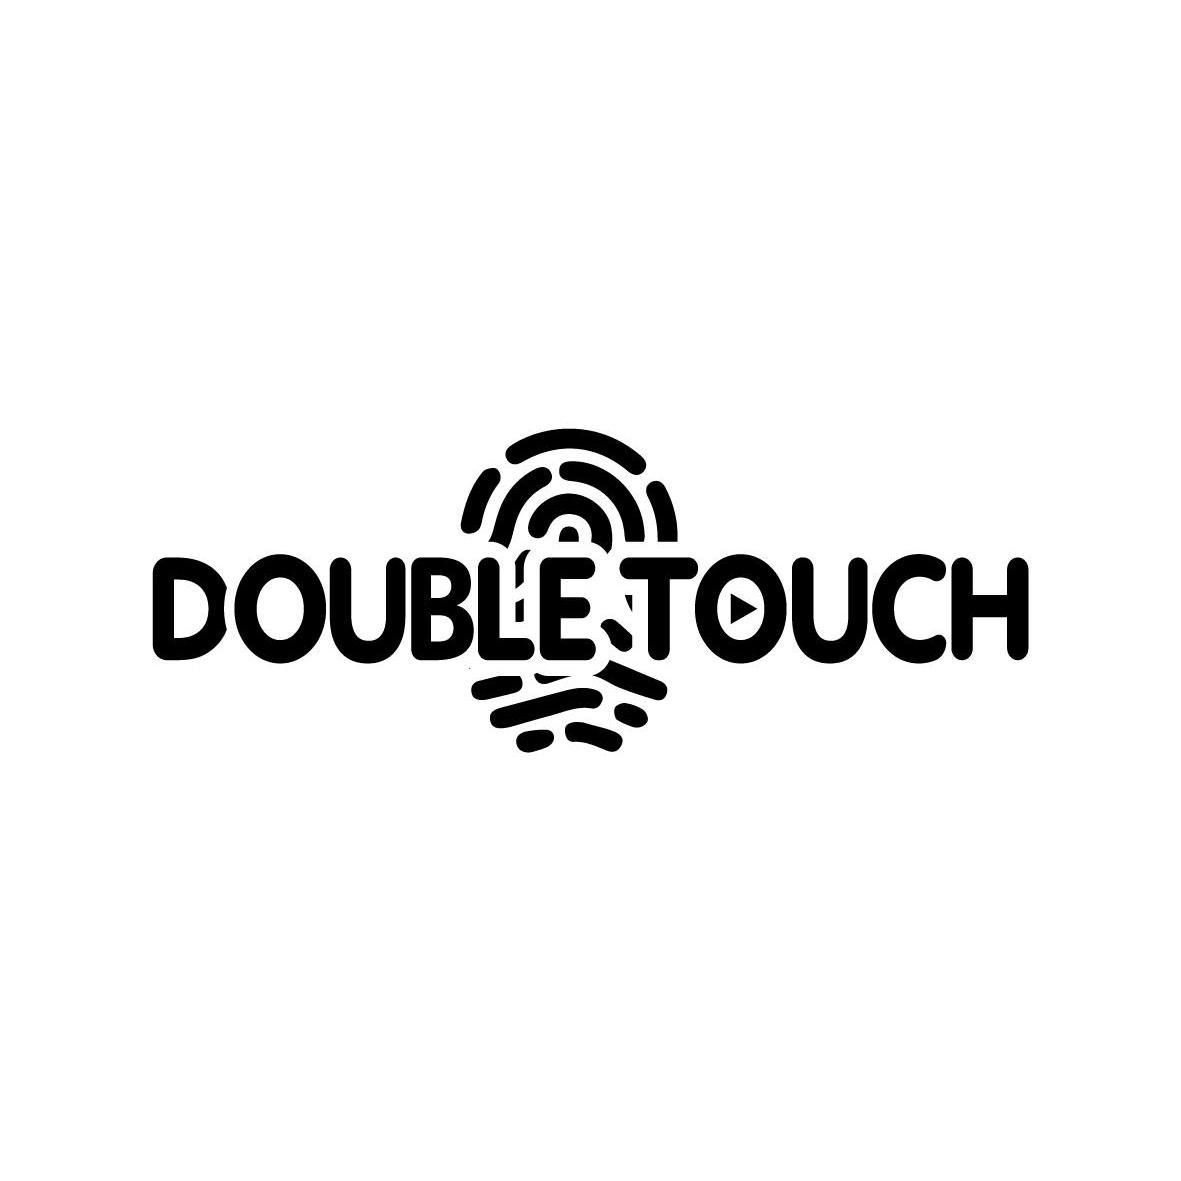 DOUBLETOUCH